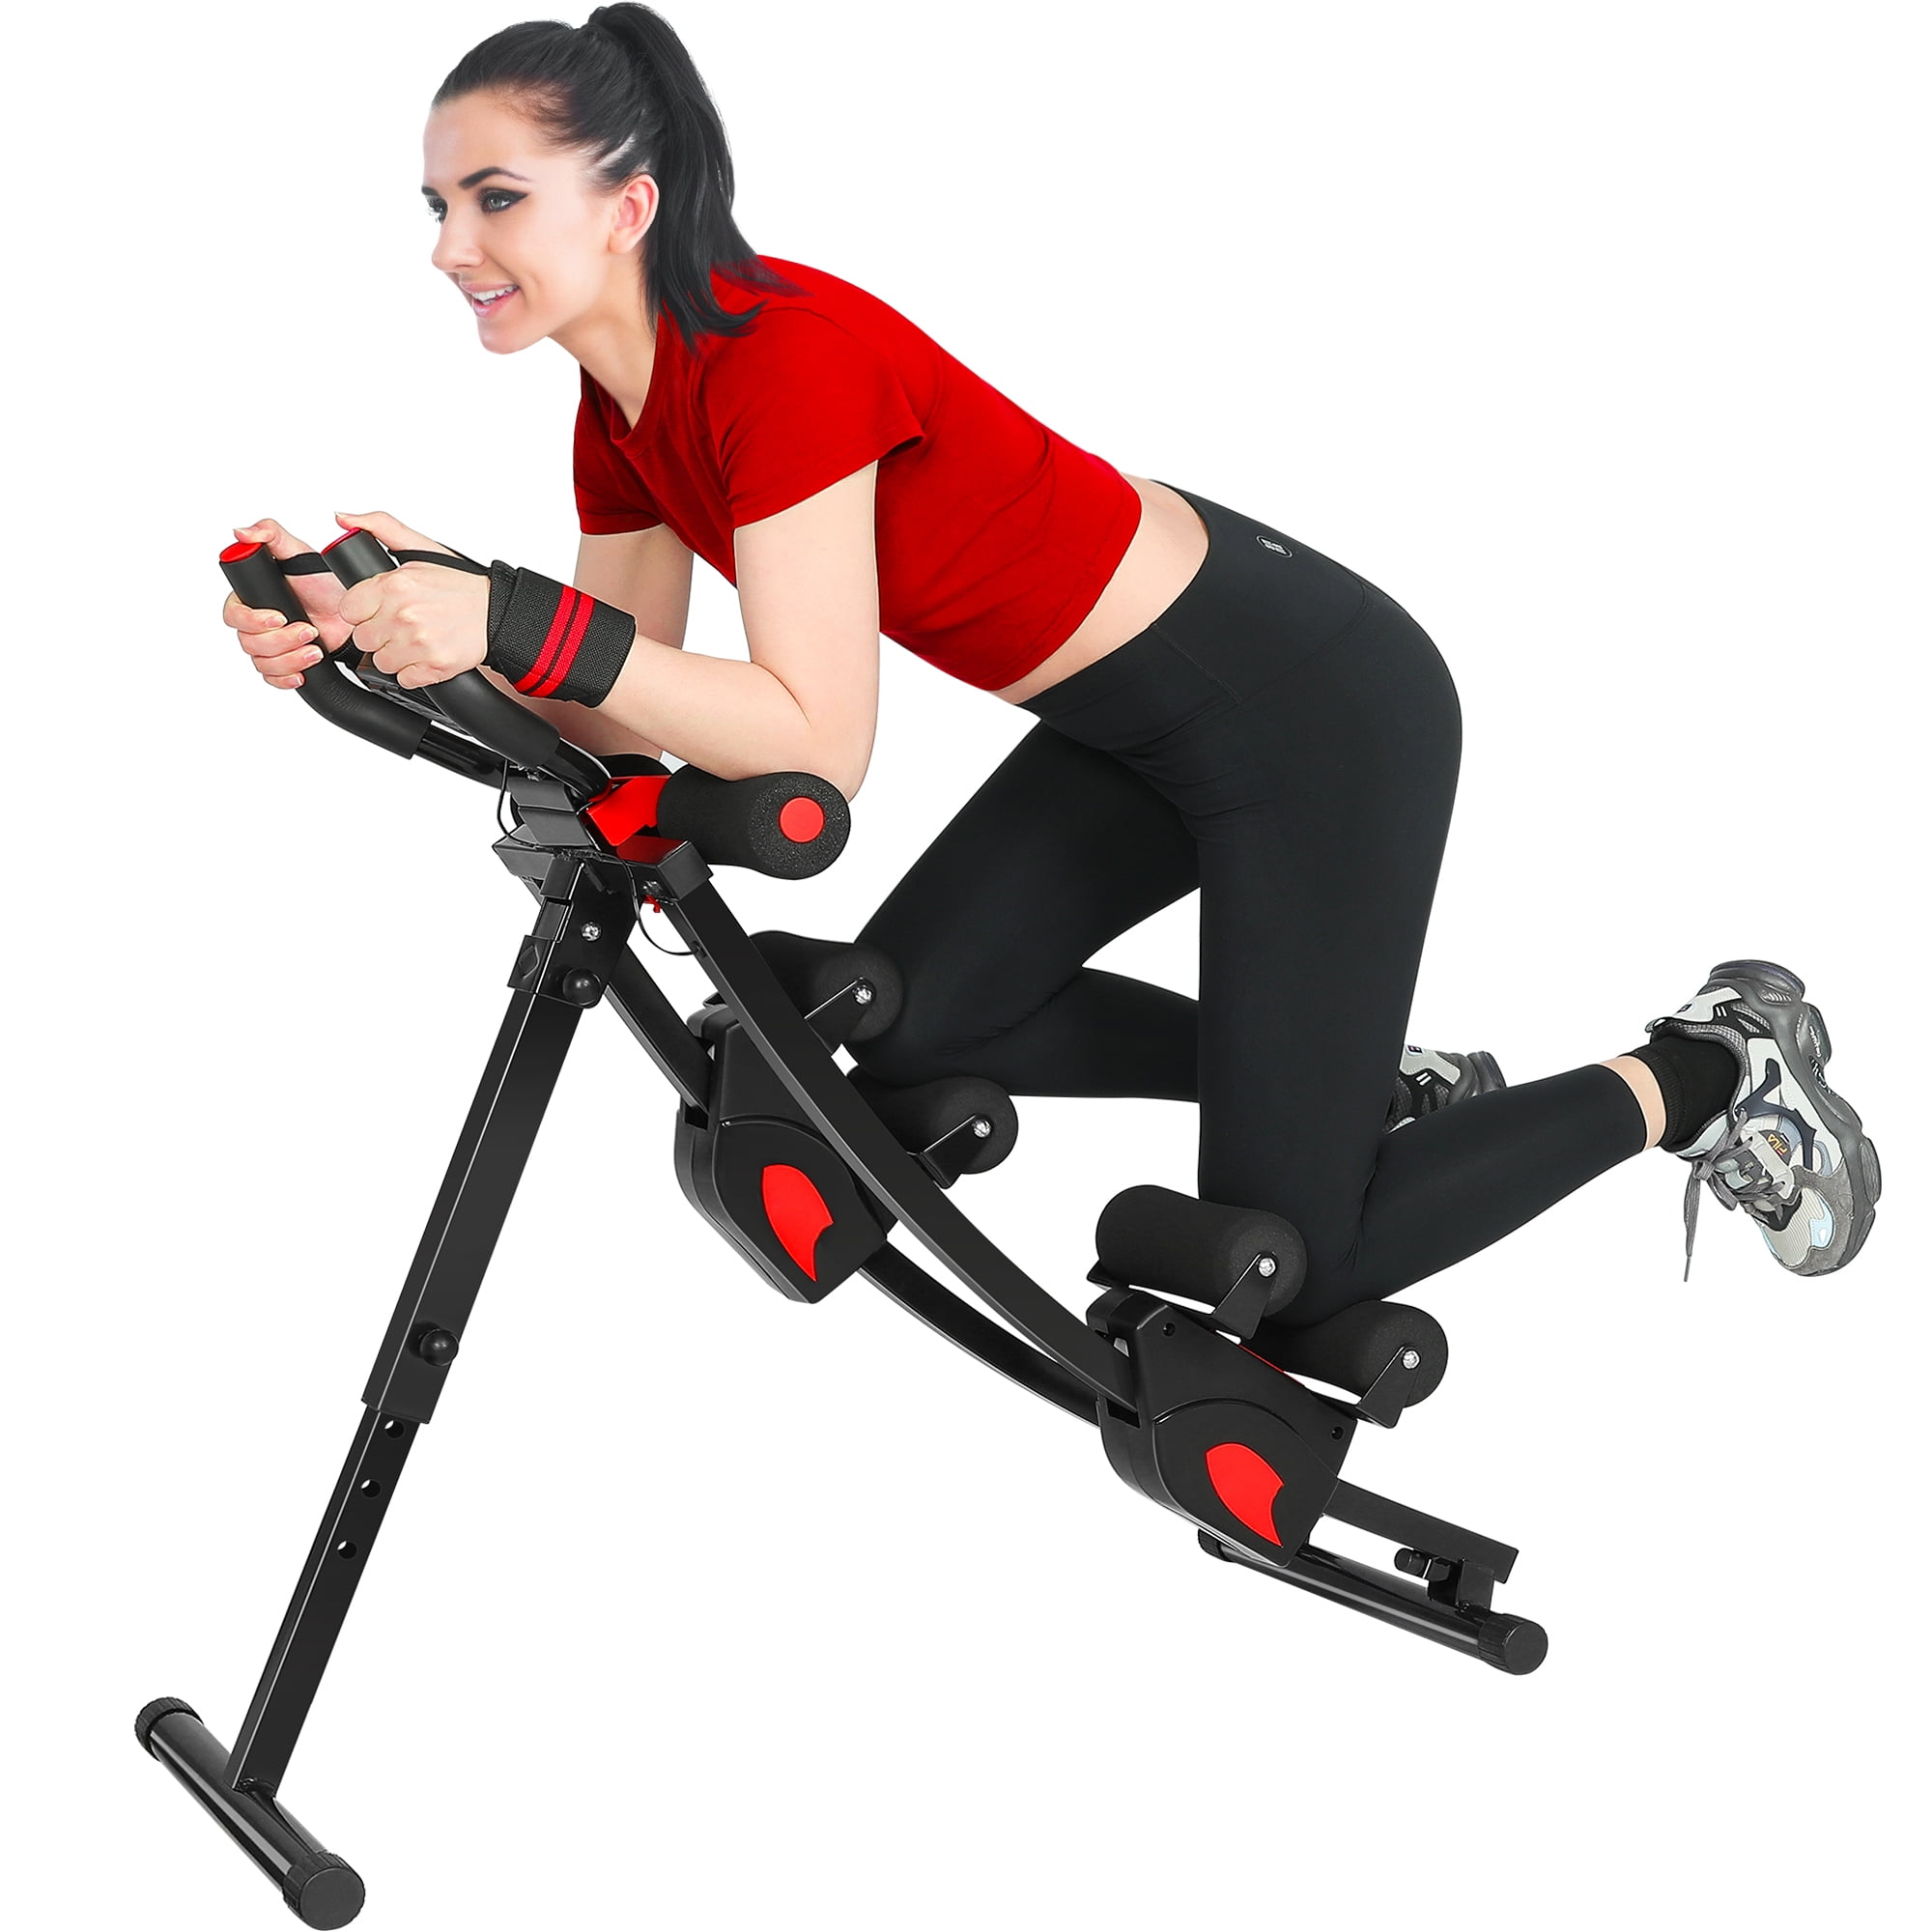  Home Workout Equipment for Women. Home Gym Equipment